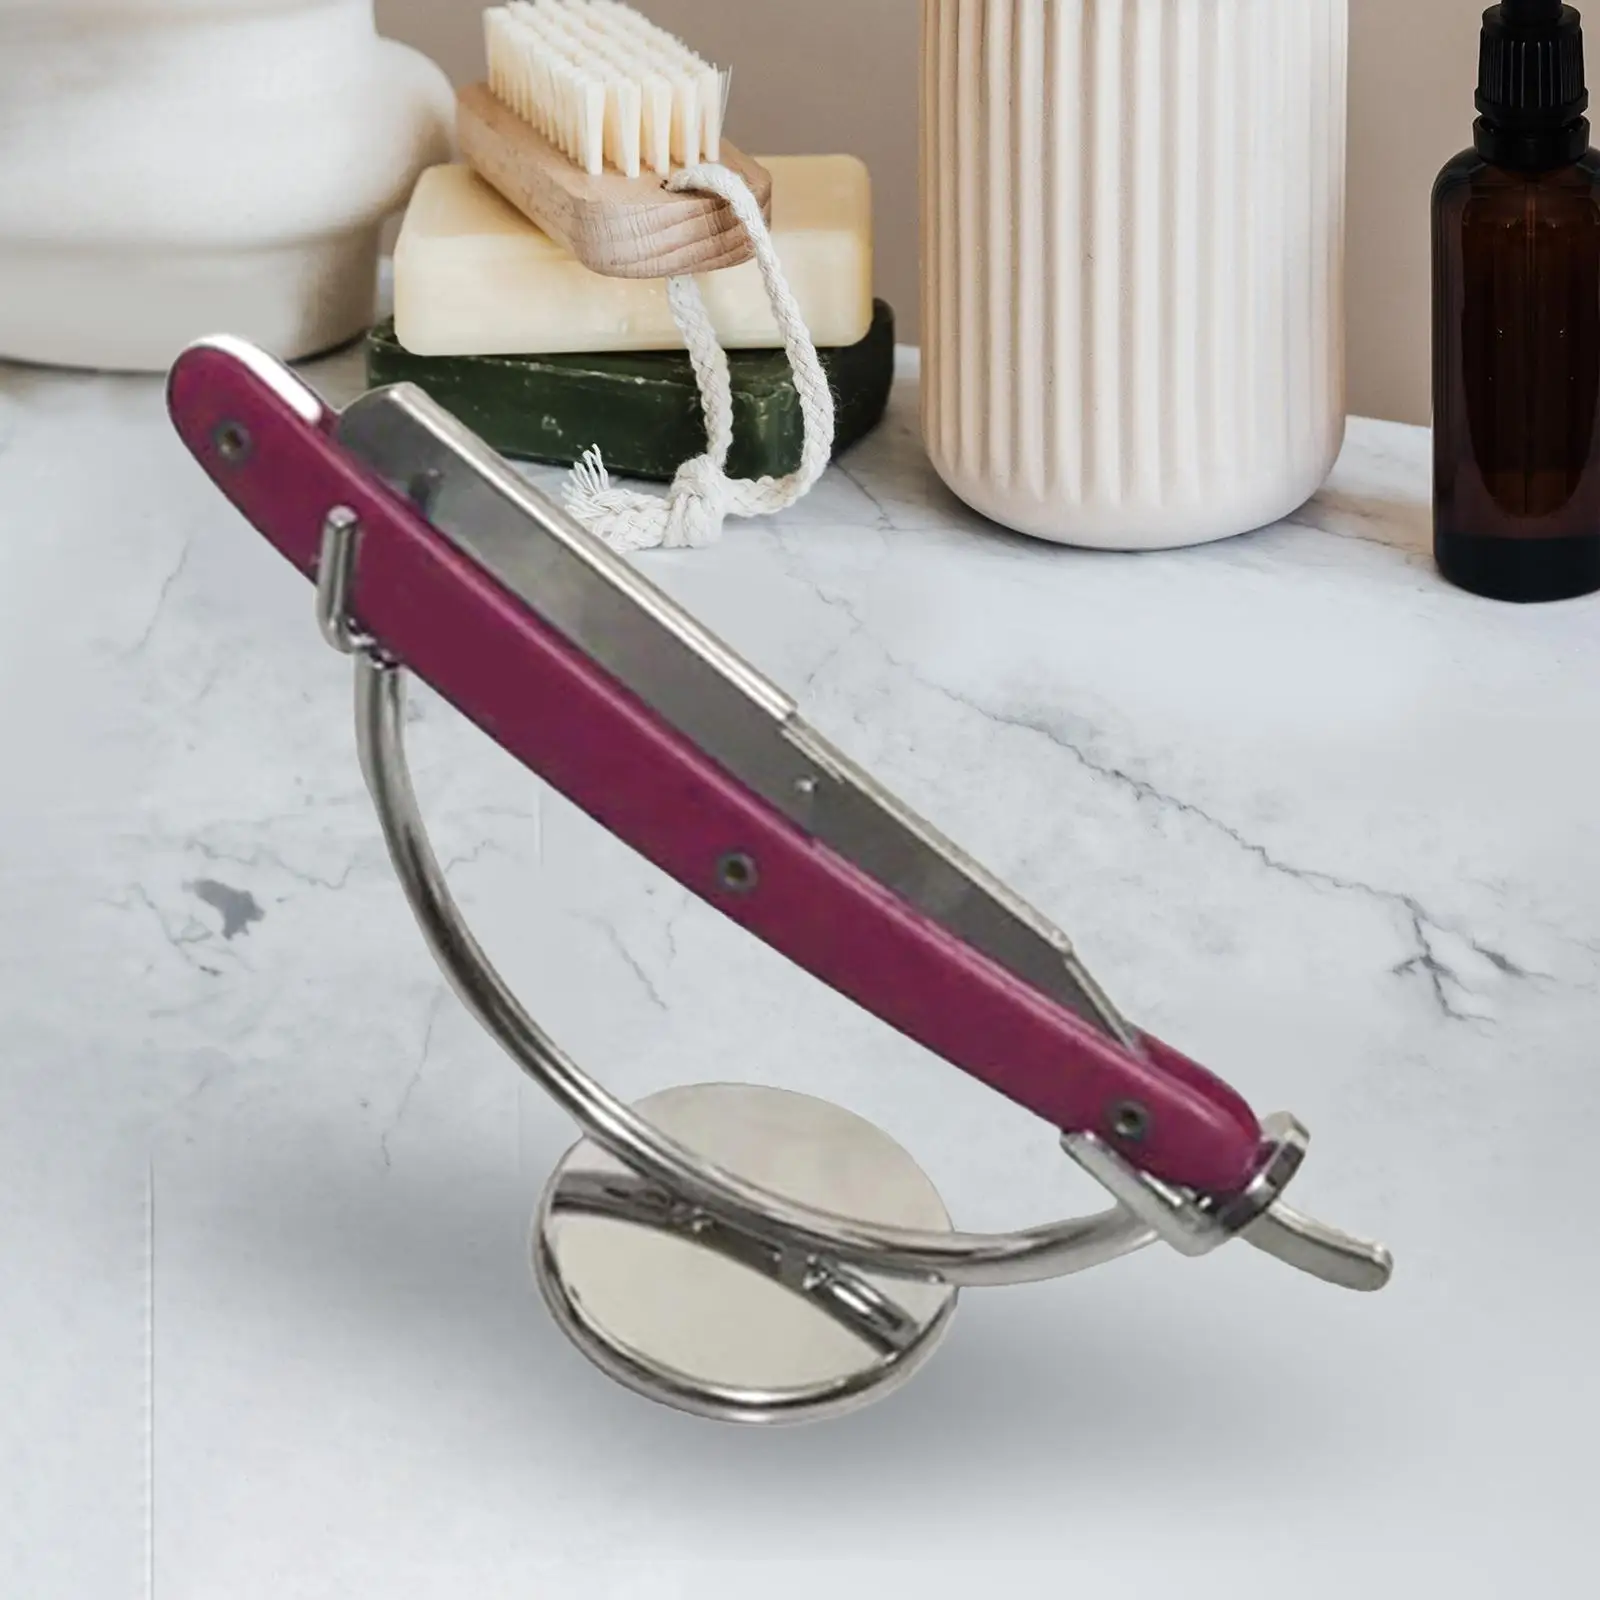 Straight Razor Stand Curved Stand Razor Holder Anti Skid Base for Stability Polished Finishing Present for Men Organizer Durable